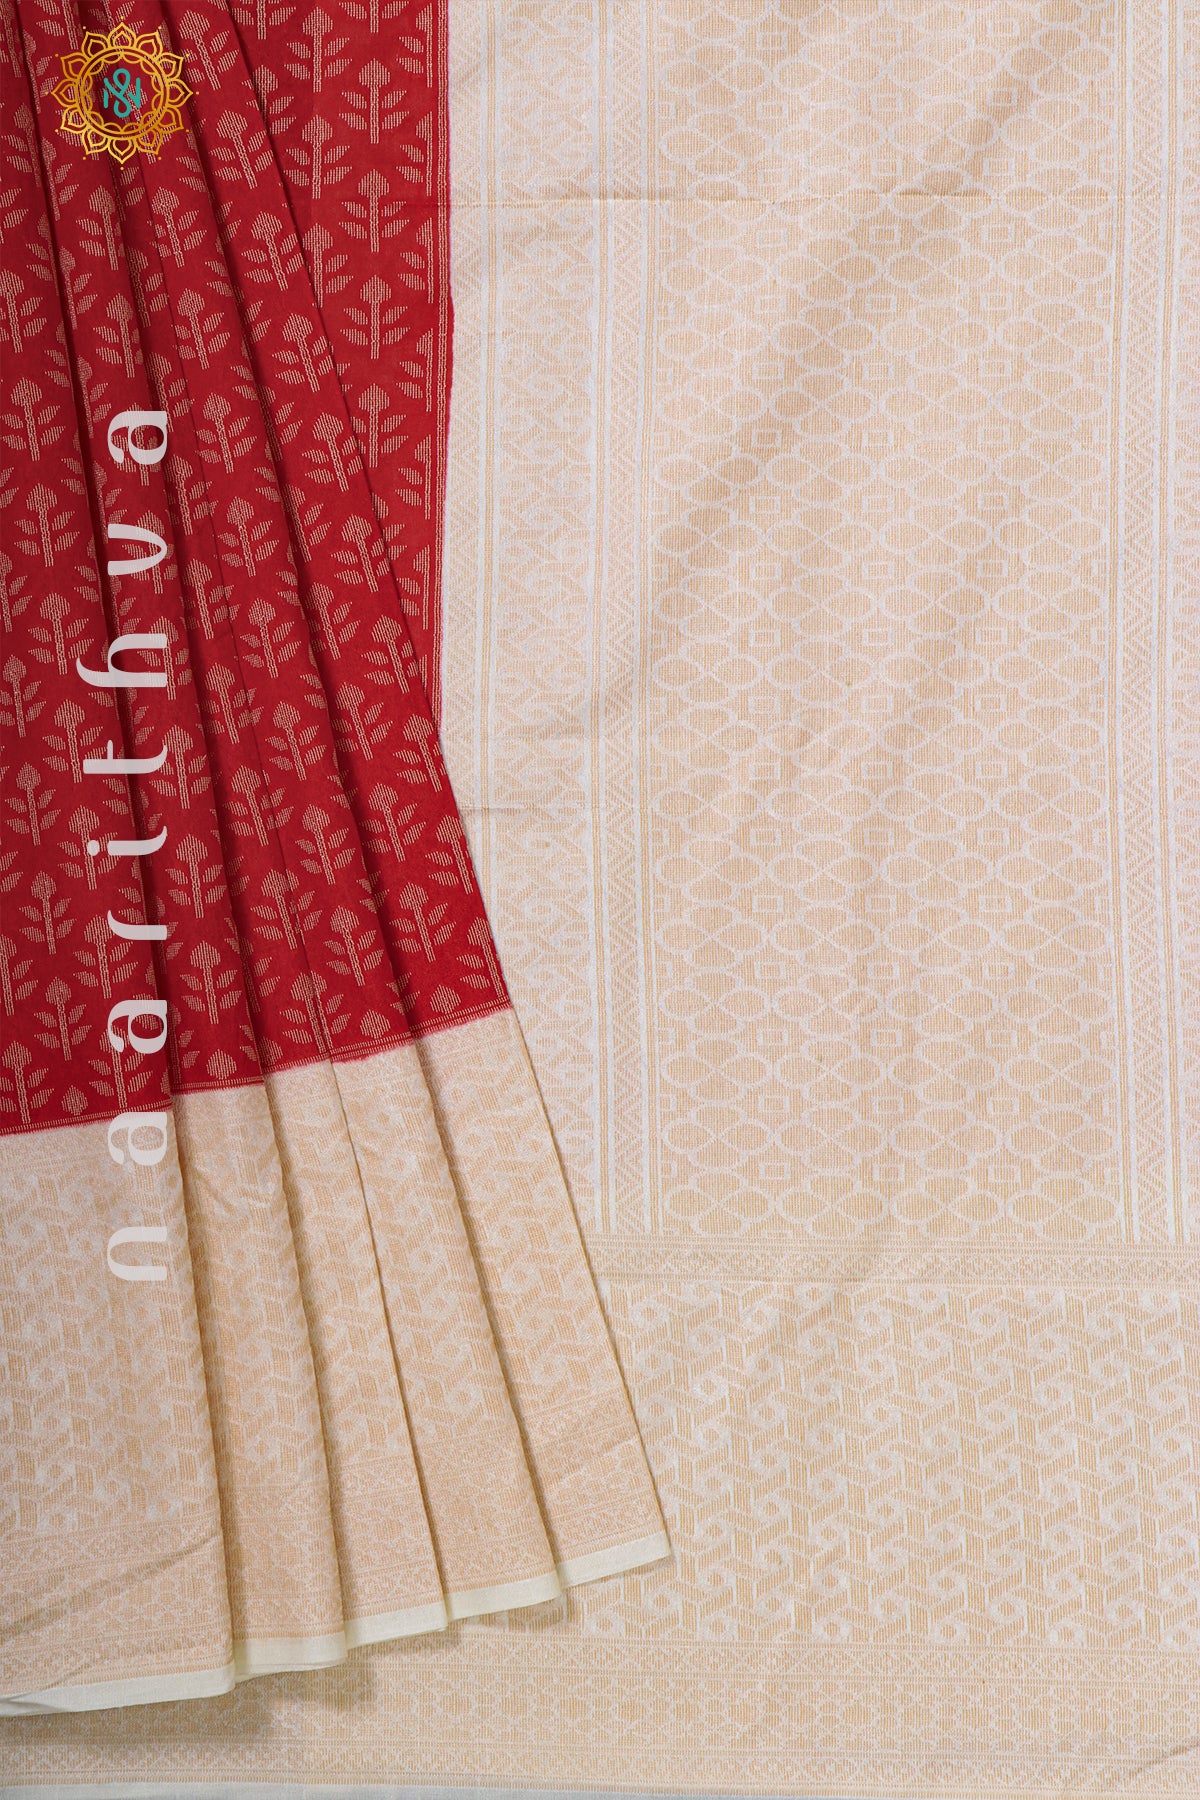 RED WITH OFF WHITE - JUTE COTTON